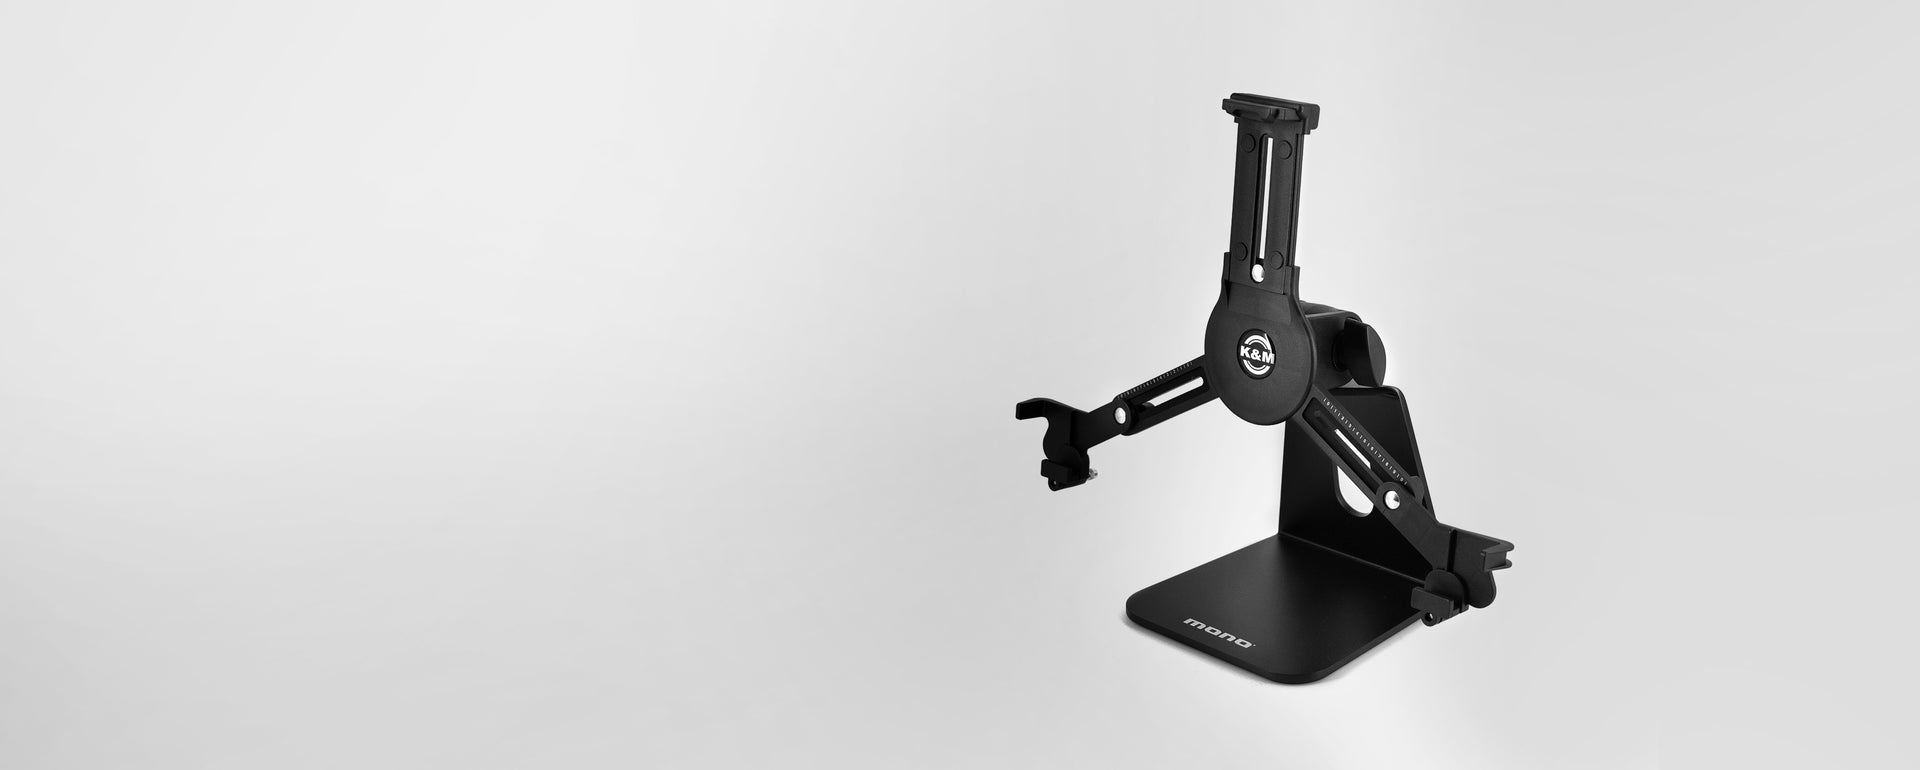 DEVICE STAND WITH K&M TABLET HOLDER